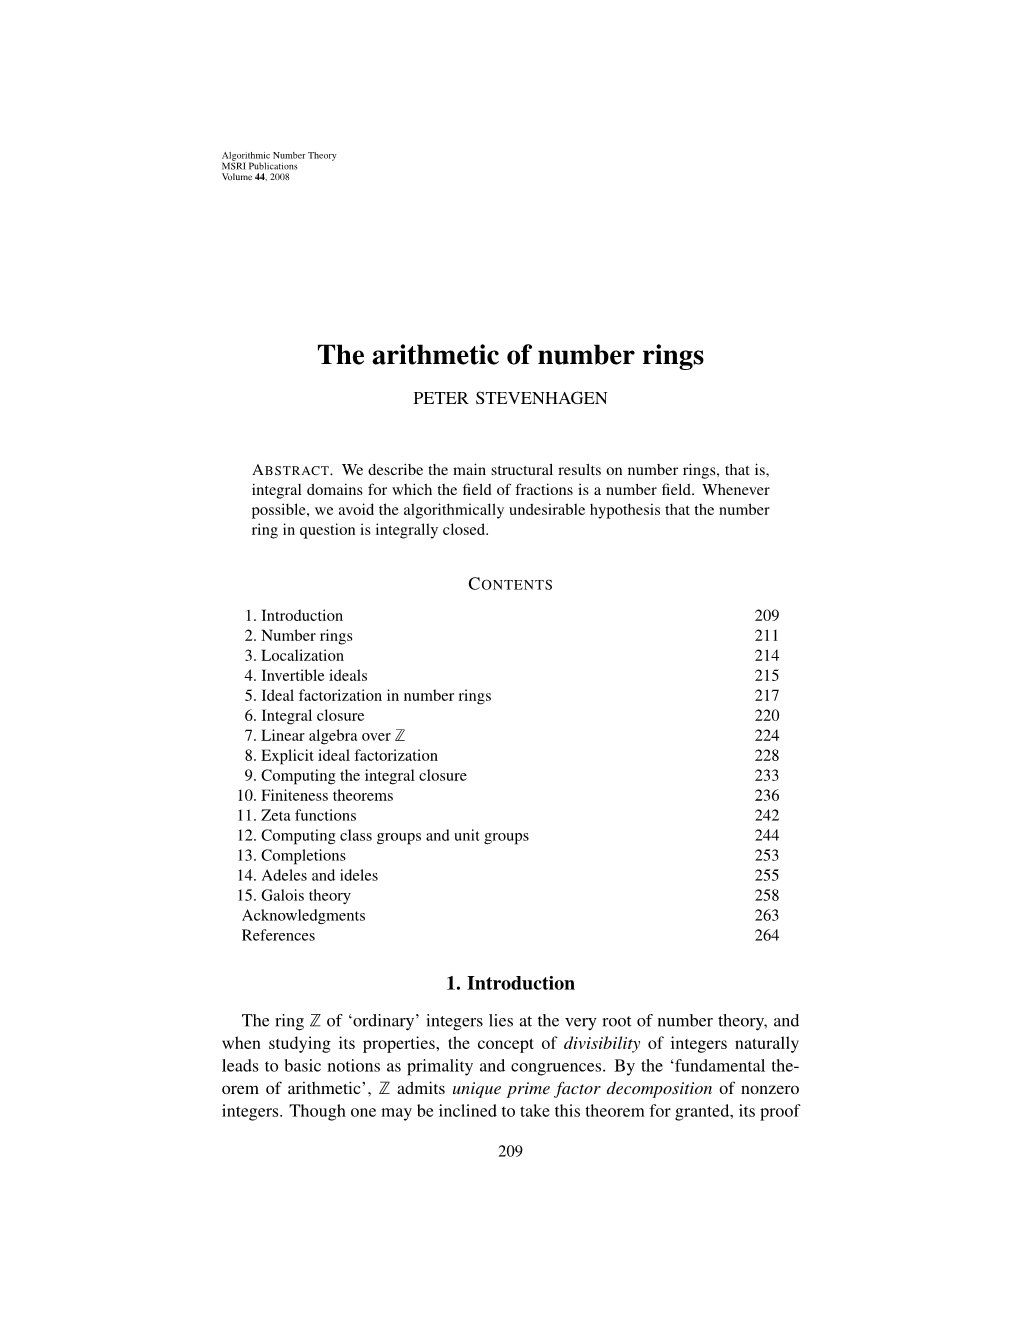 The Arithmetic of Number Rings